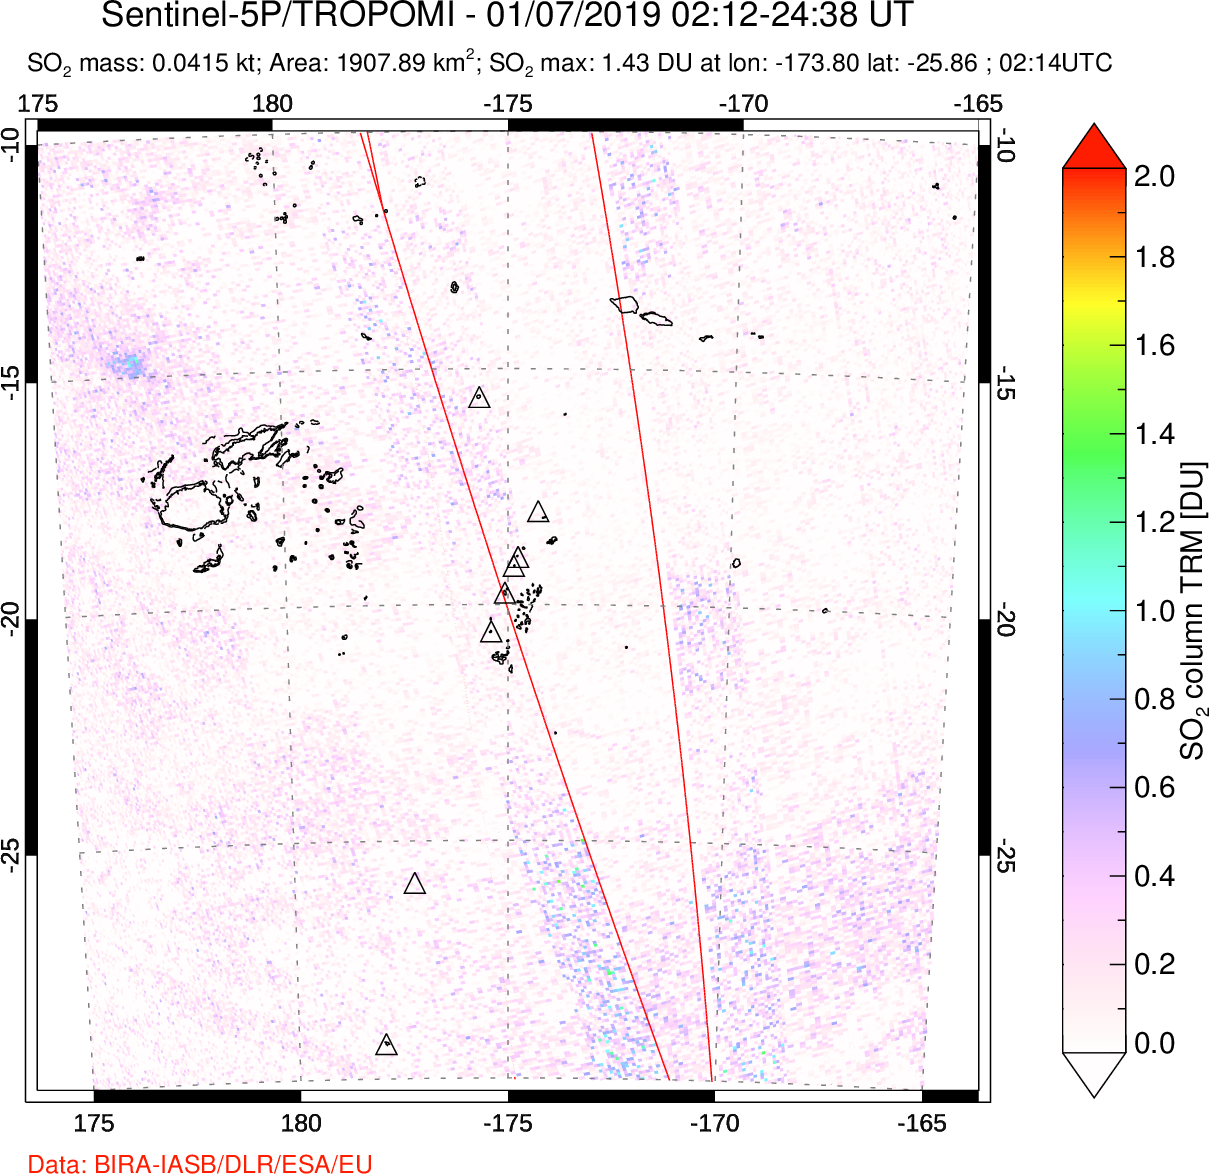 A sulfur dioxide image over Tonga, South Pacific on Jan 07, 2019.